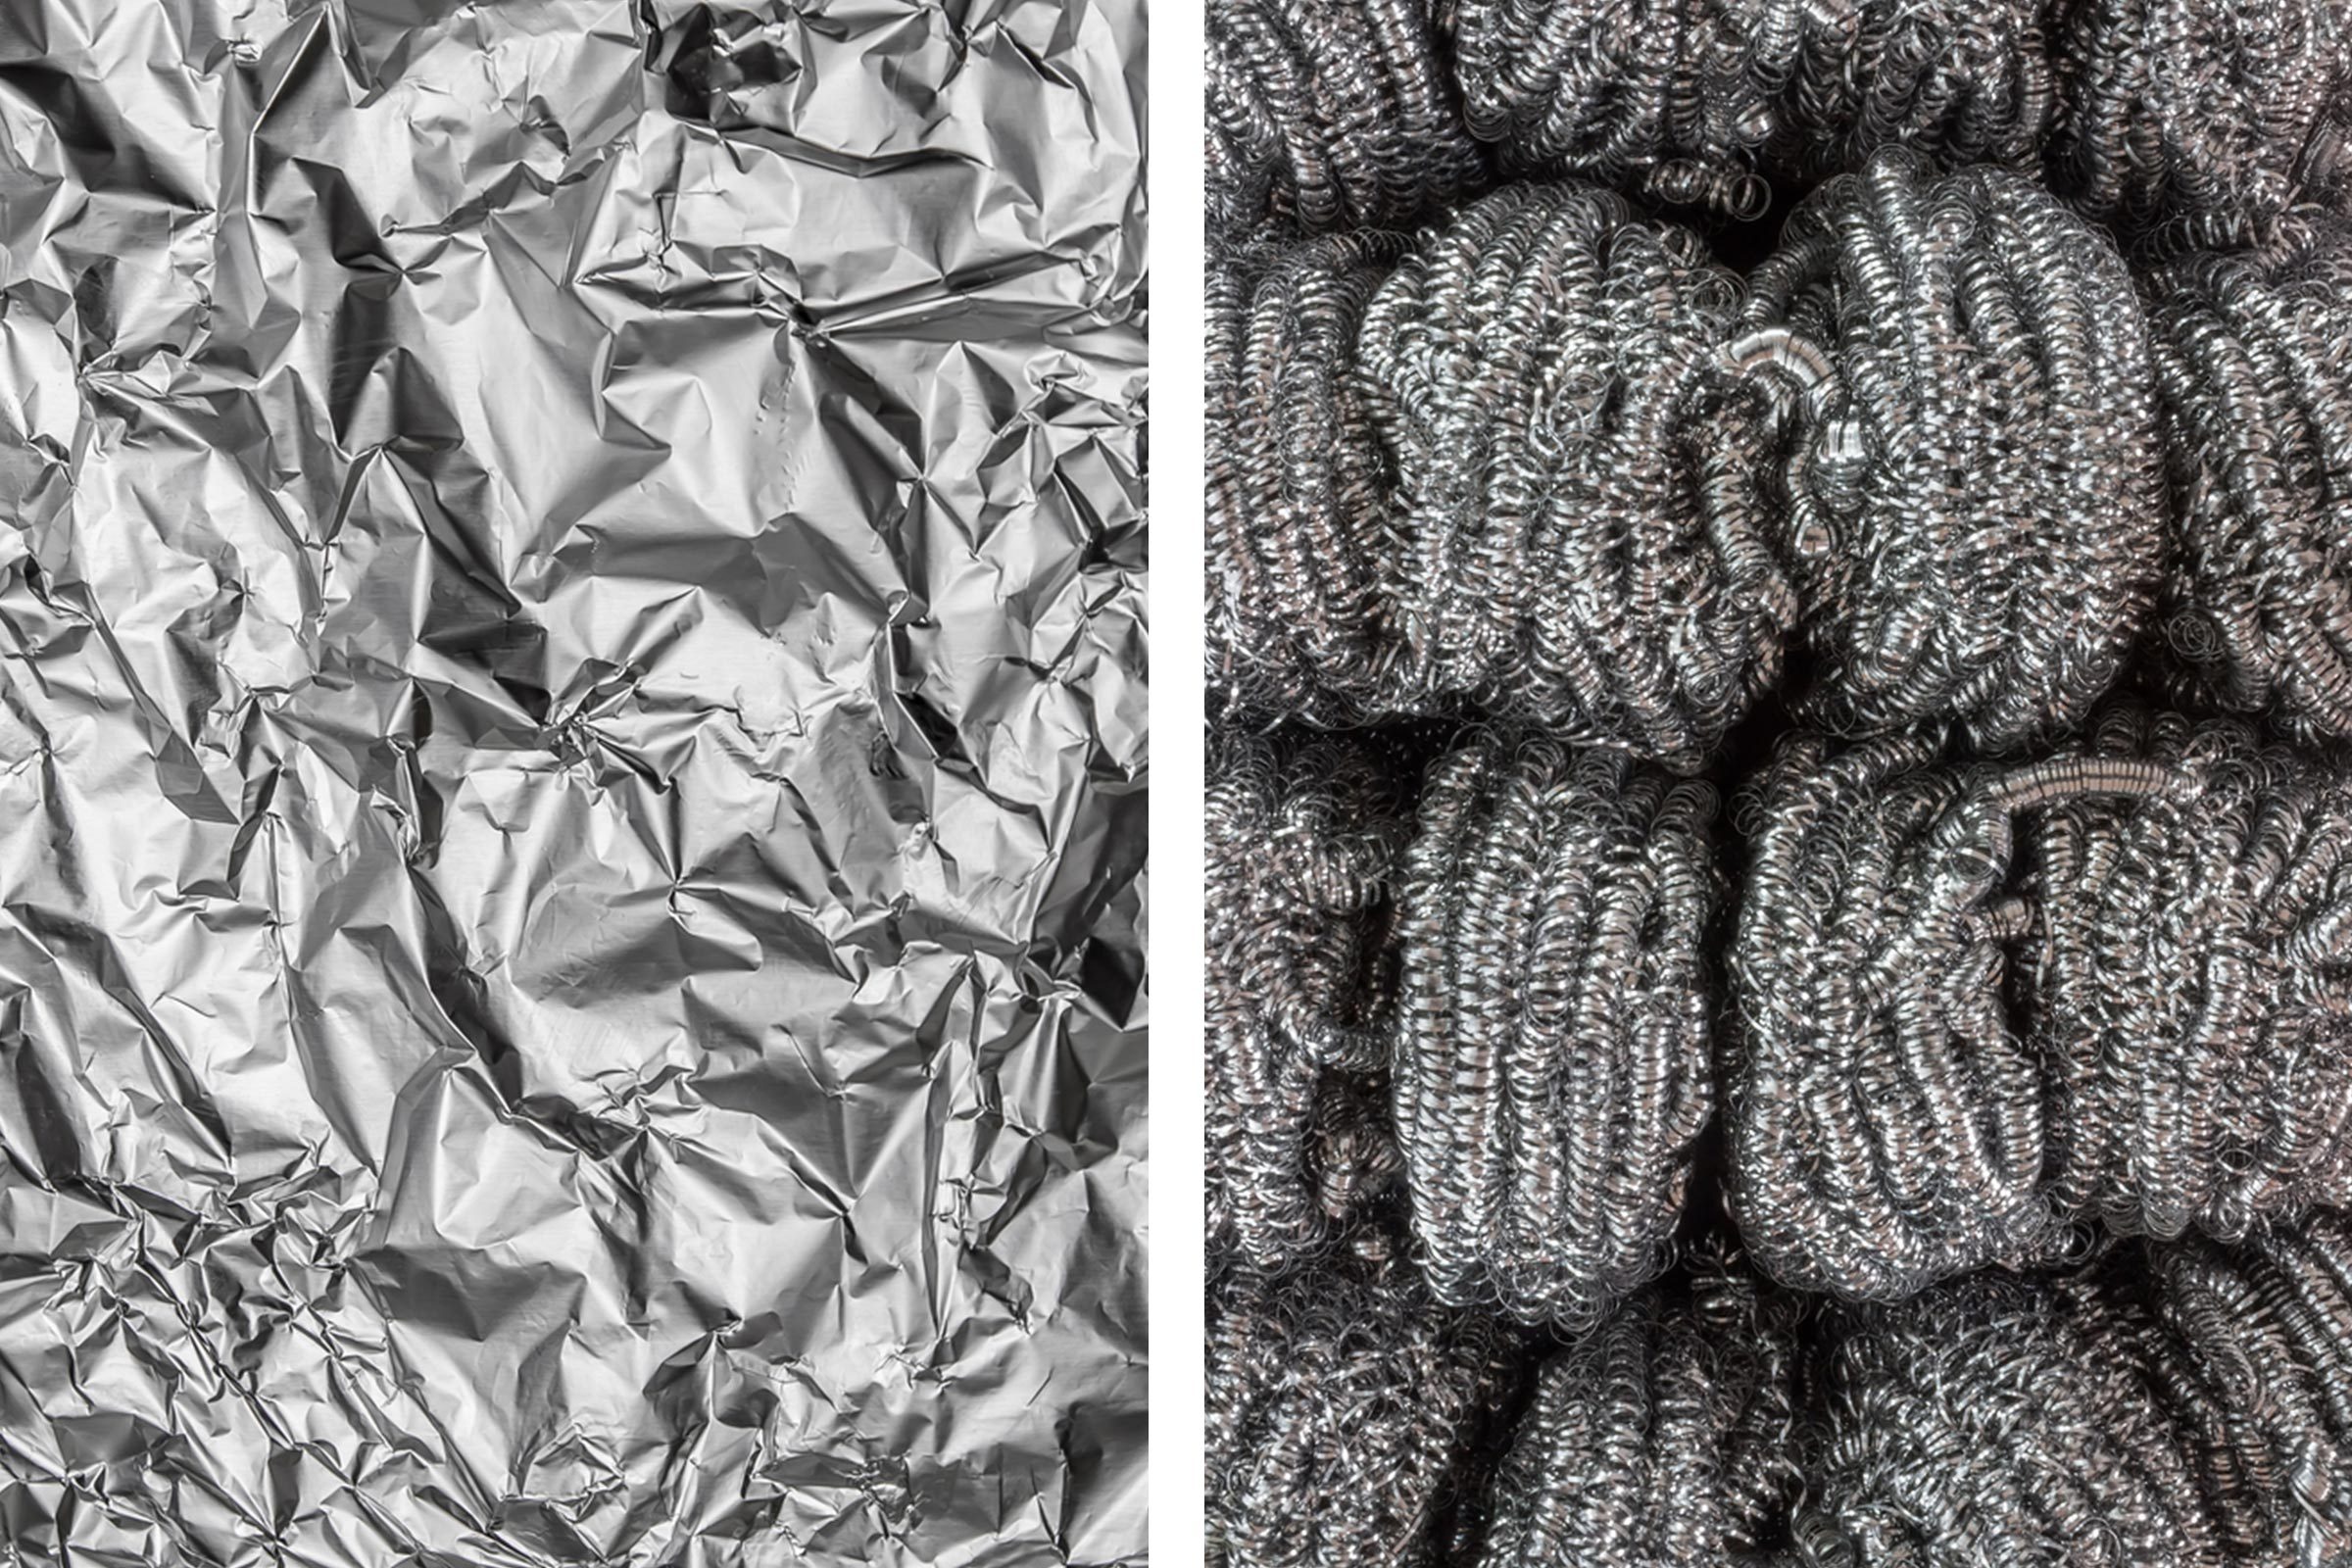 7 Things You Should Never Do With Aluminum Foil